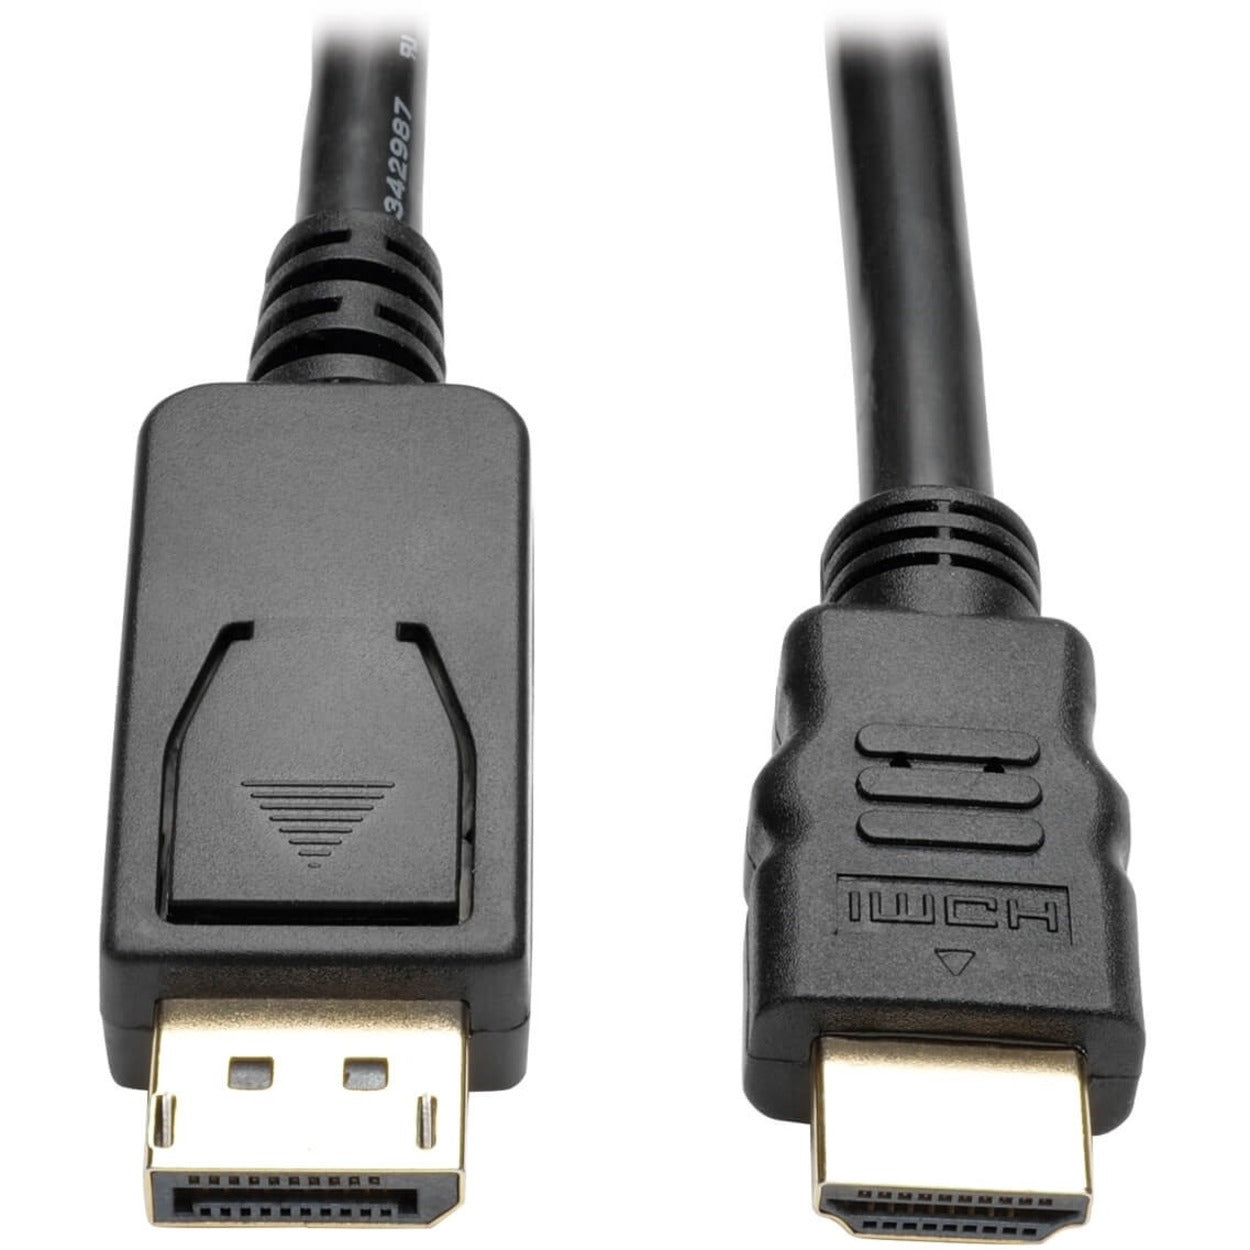 Tripp Lite P582-003-V2 DisplayPort 1.2 to HDMI Adapter Cable, 3 ft. UHD-Compatible